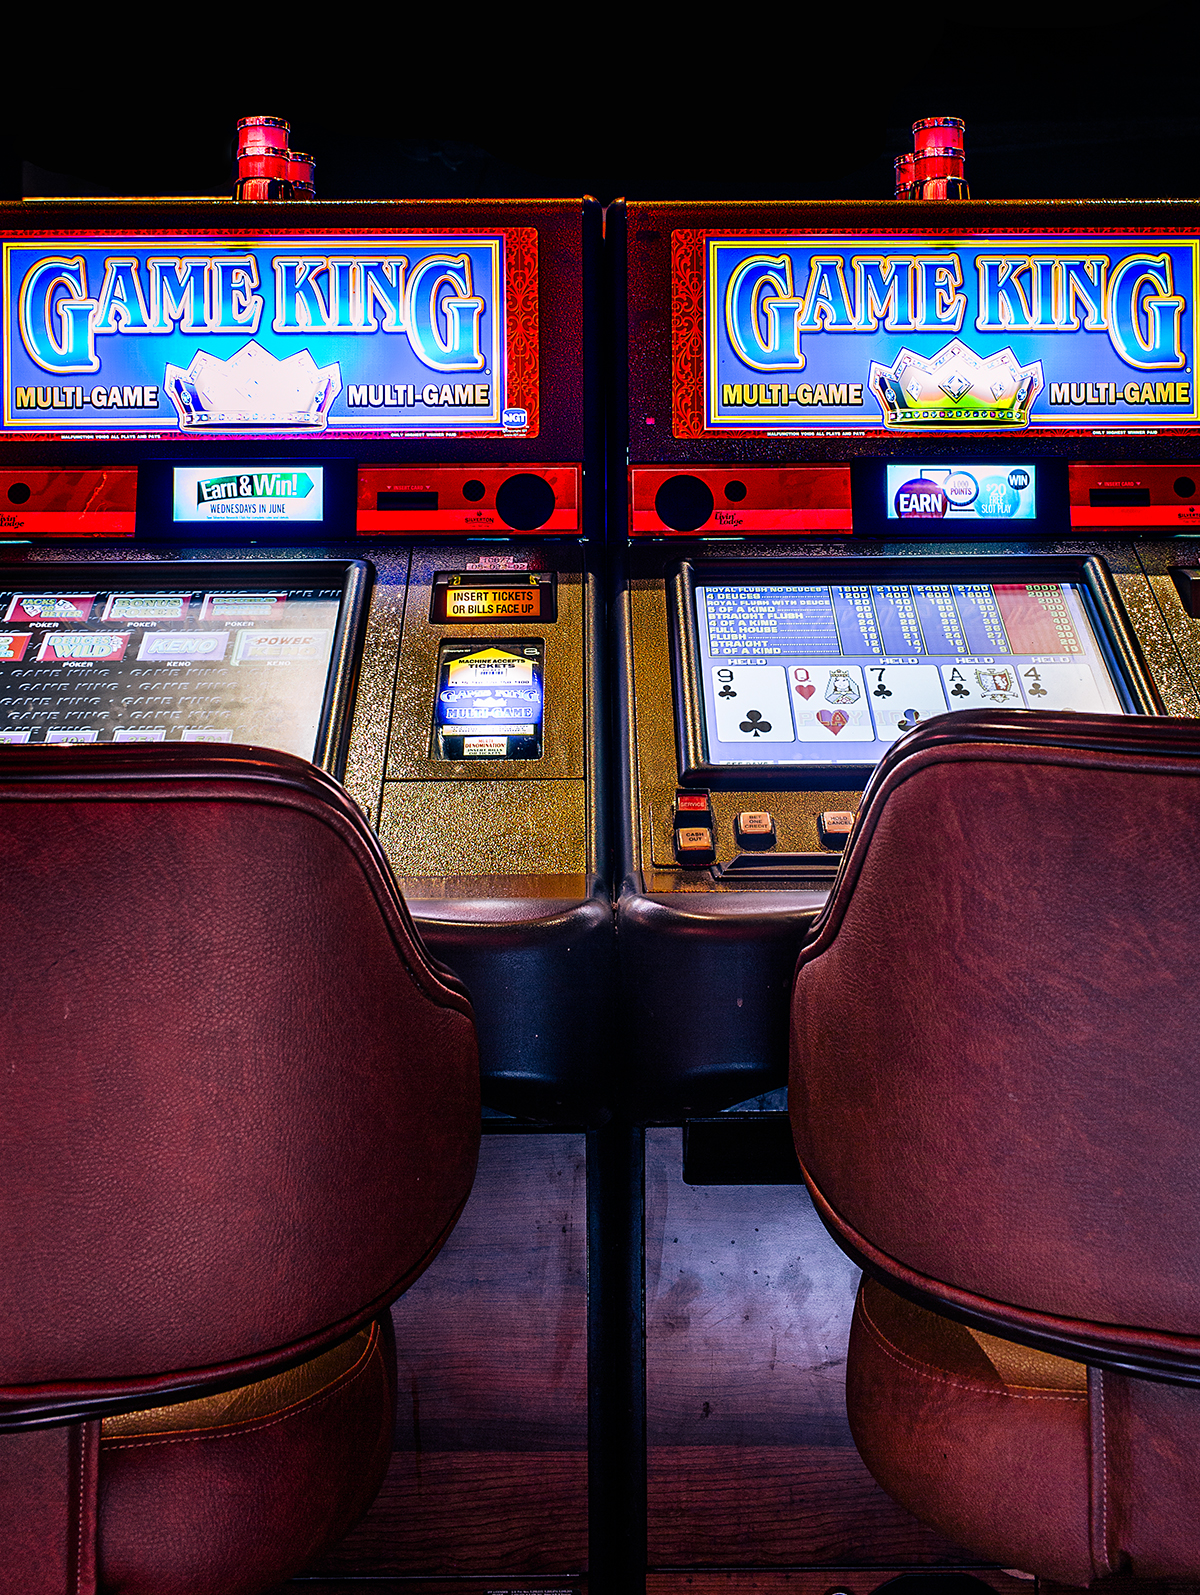 How to Hack Gas Station Slot Machines